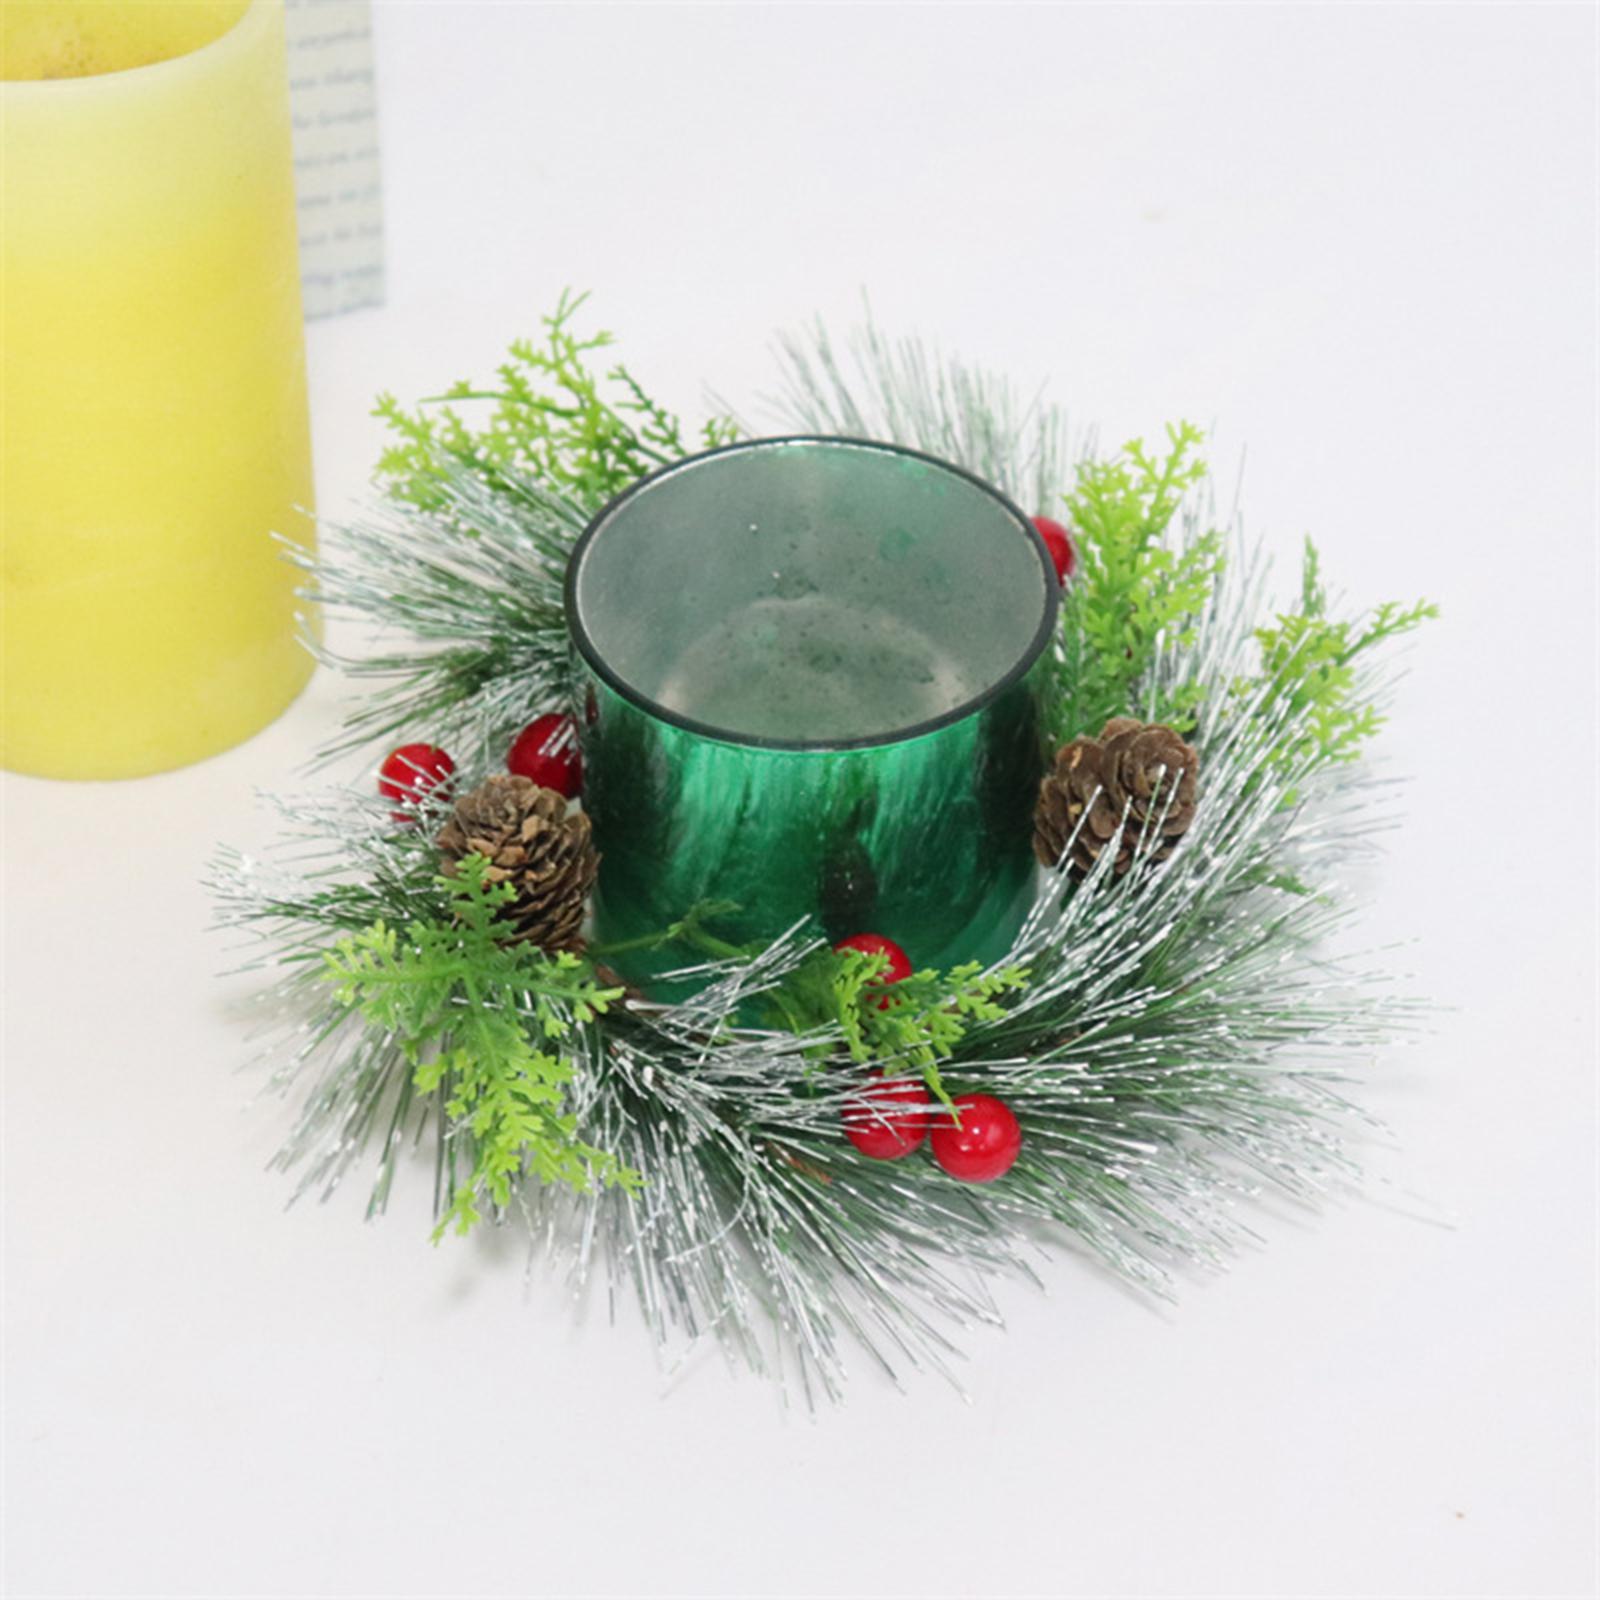 Candle Rings Mini Wreaths Simulation Wreaths Bar Greenery Candle Rings Decor